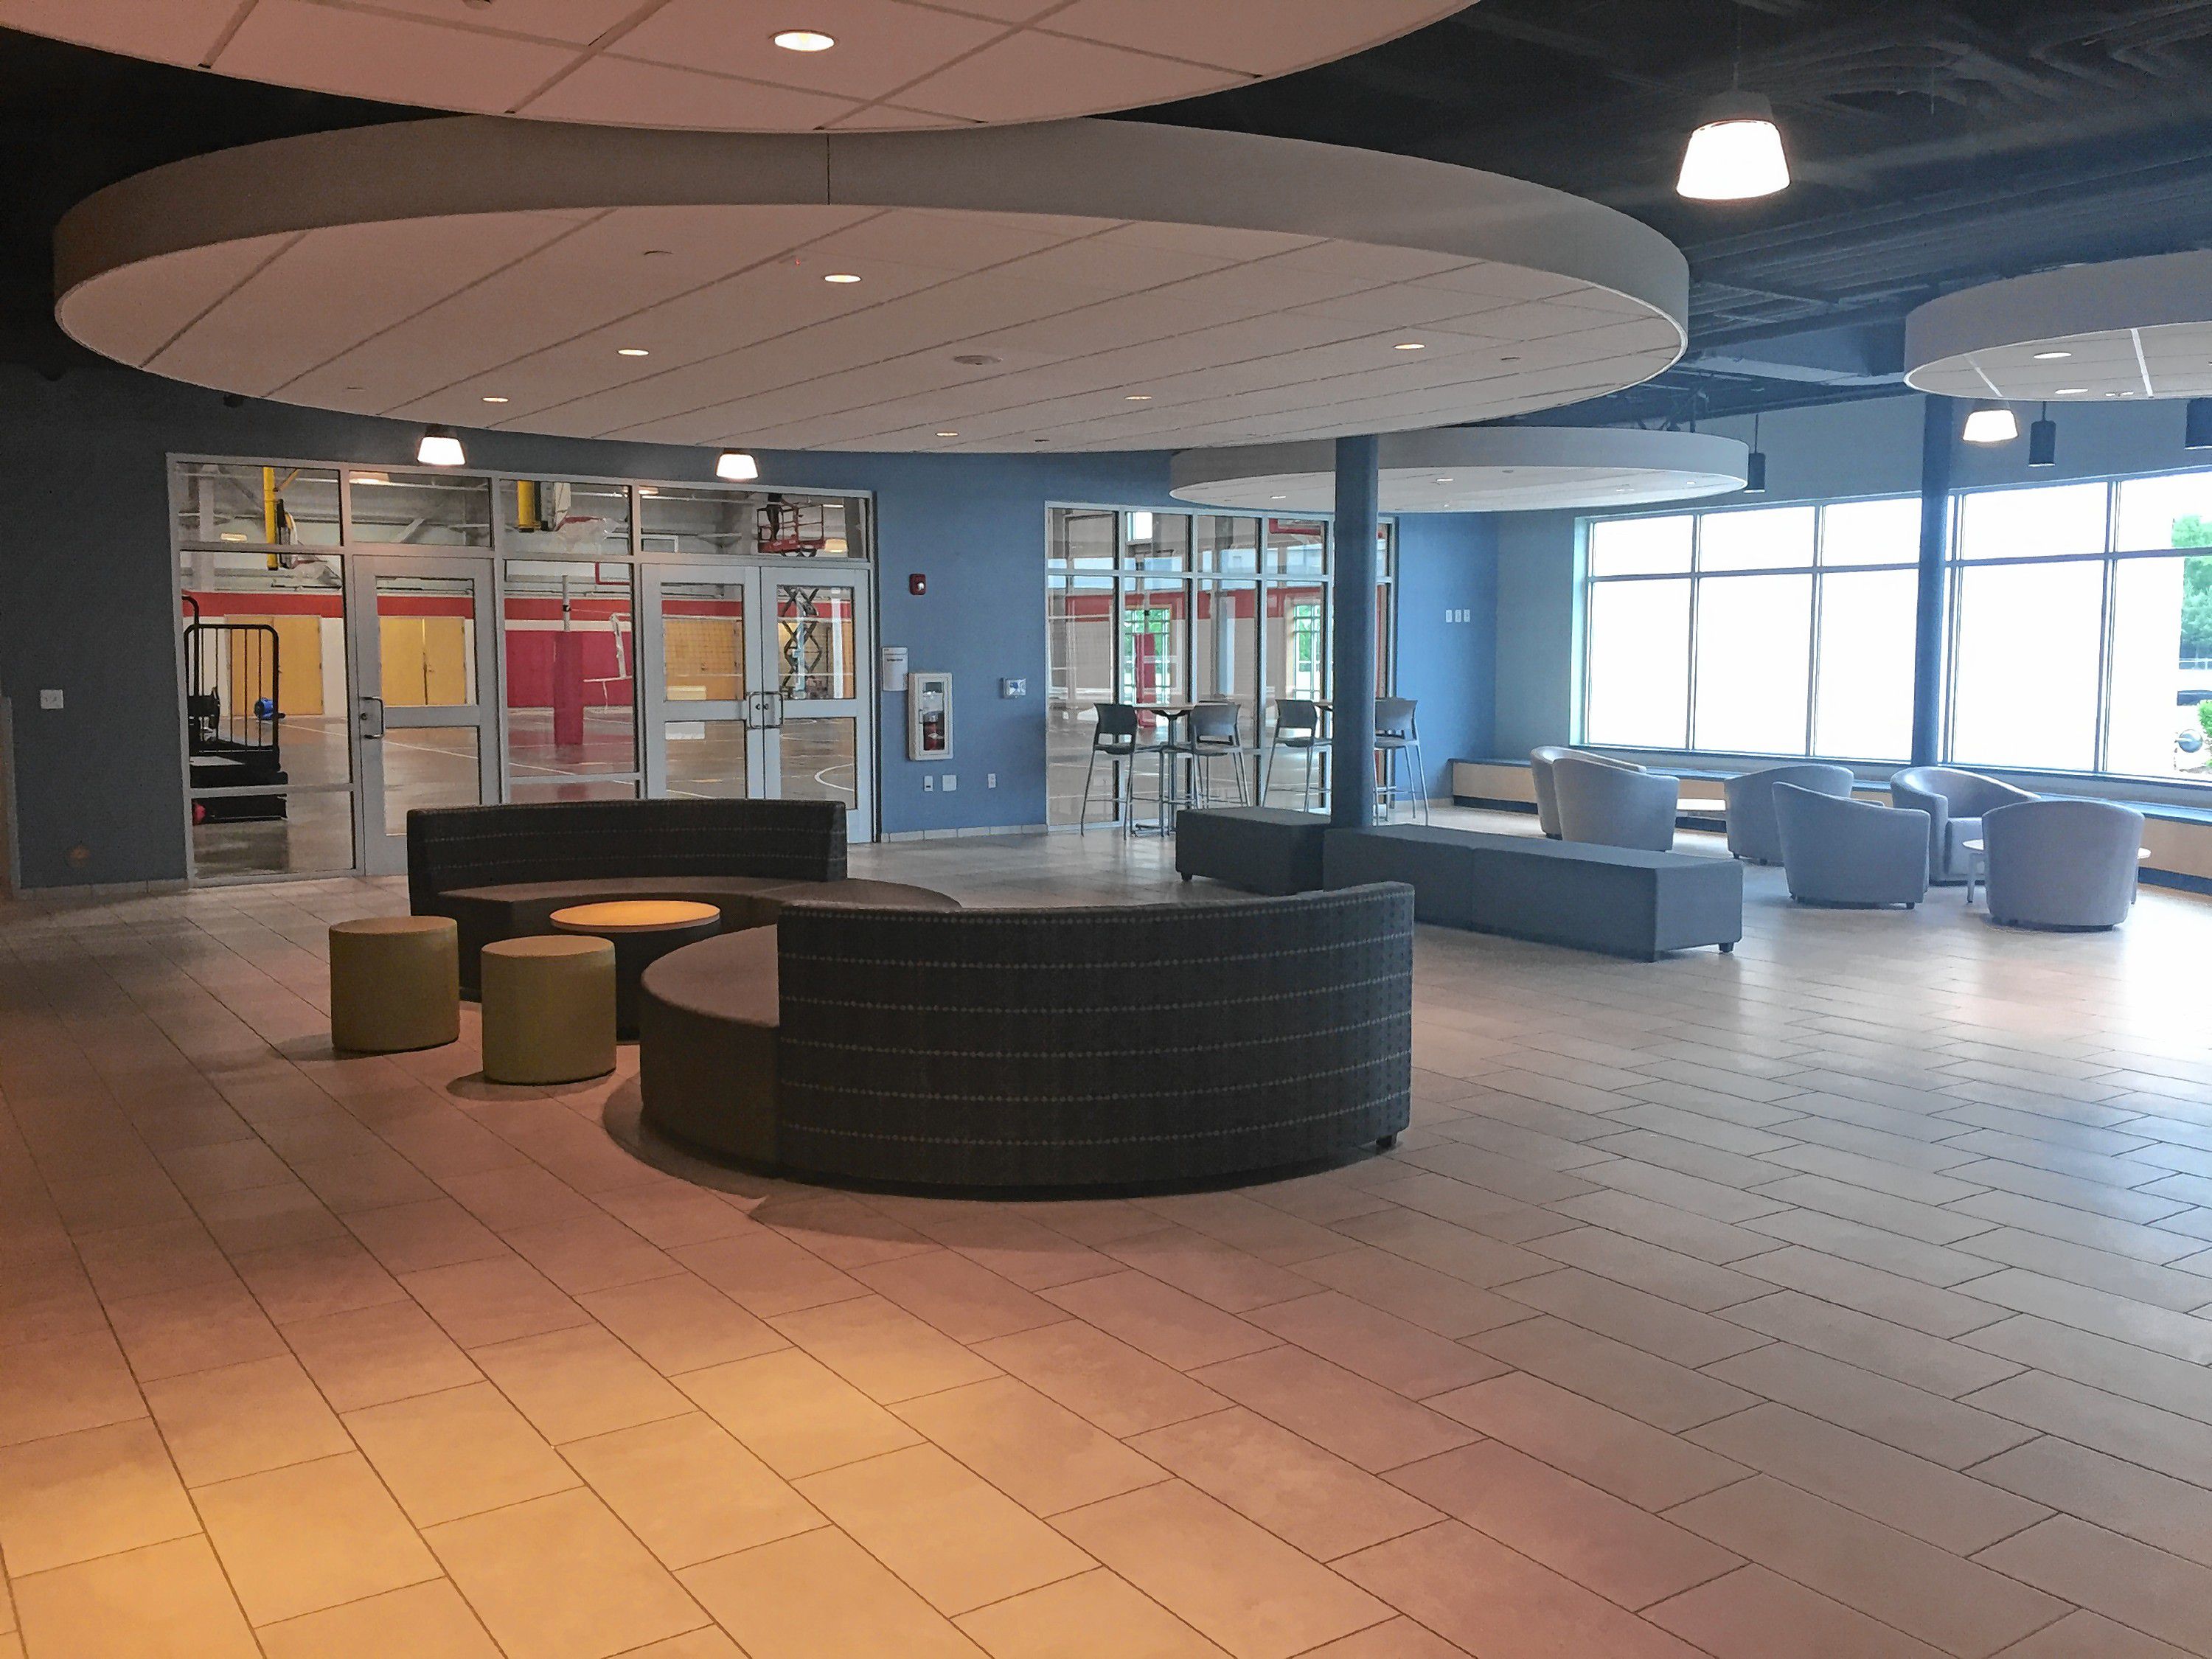 Check out the brand-spankin' new lobby and gymnasium at the new community center on Canterbury Road. The building will open to the public Monday. Courtesy of Concord Parks and Recreation